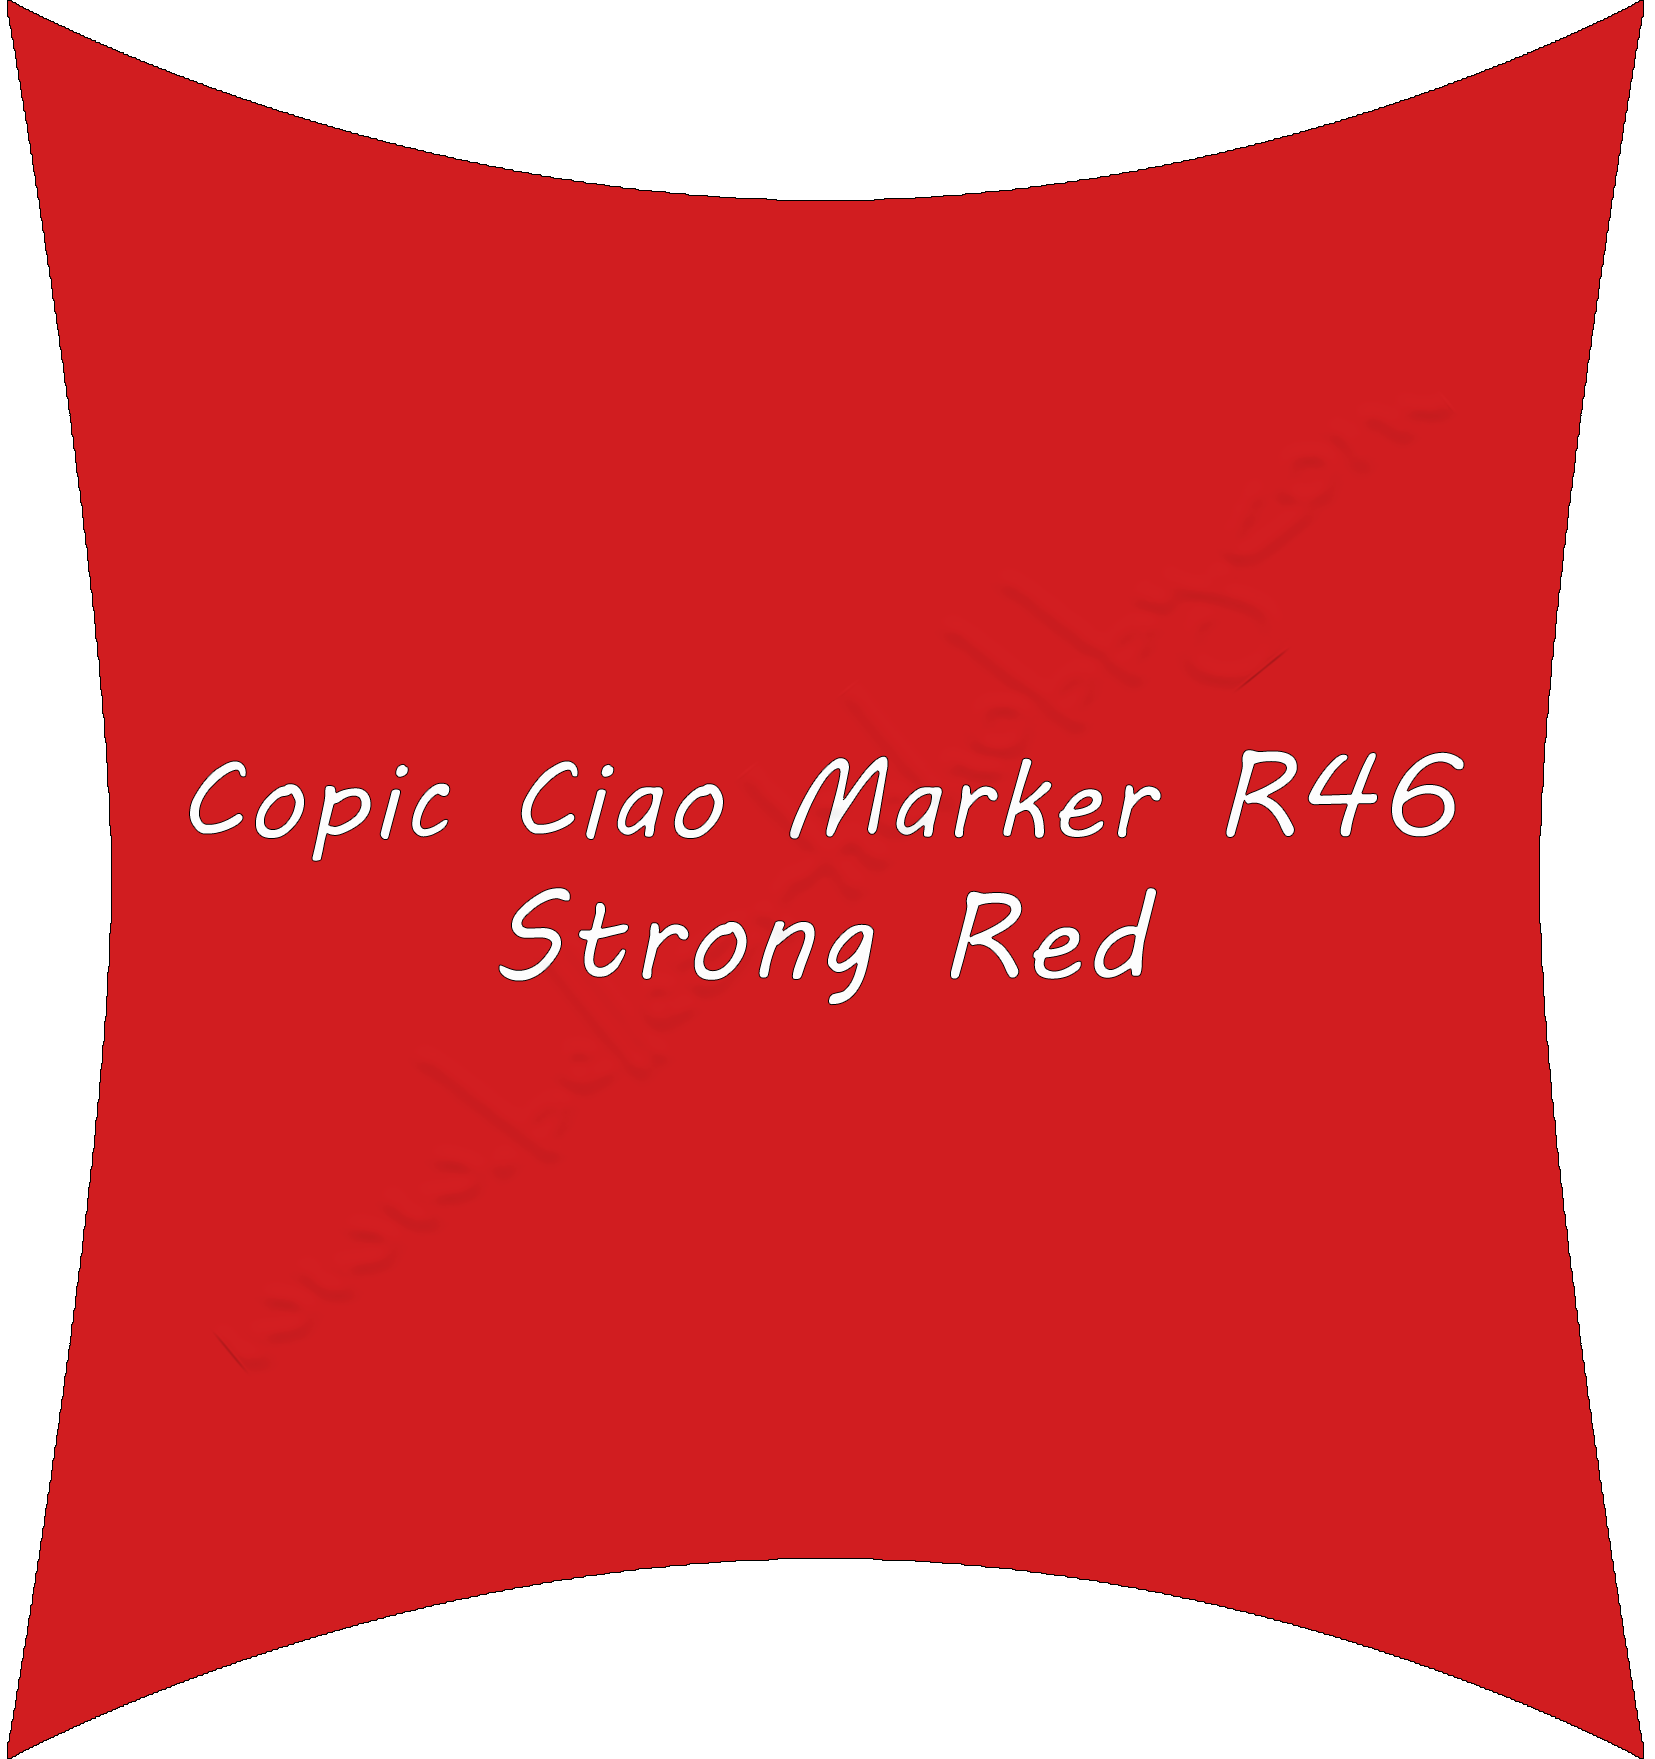 R46 Strong Red